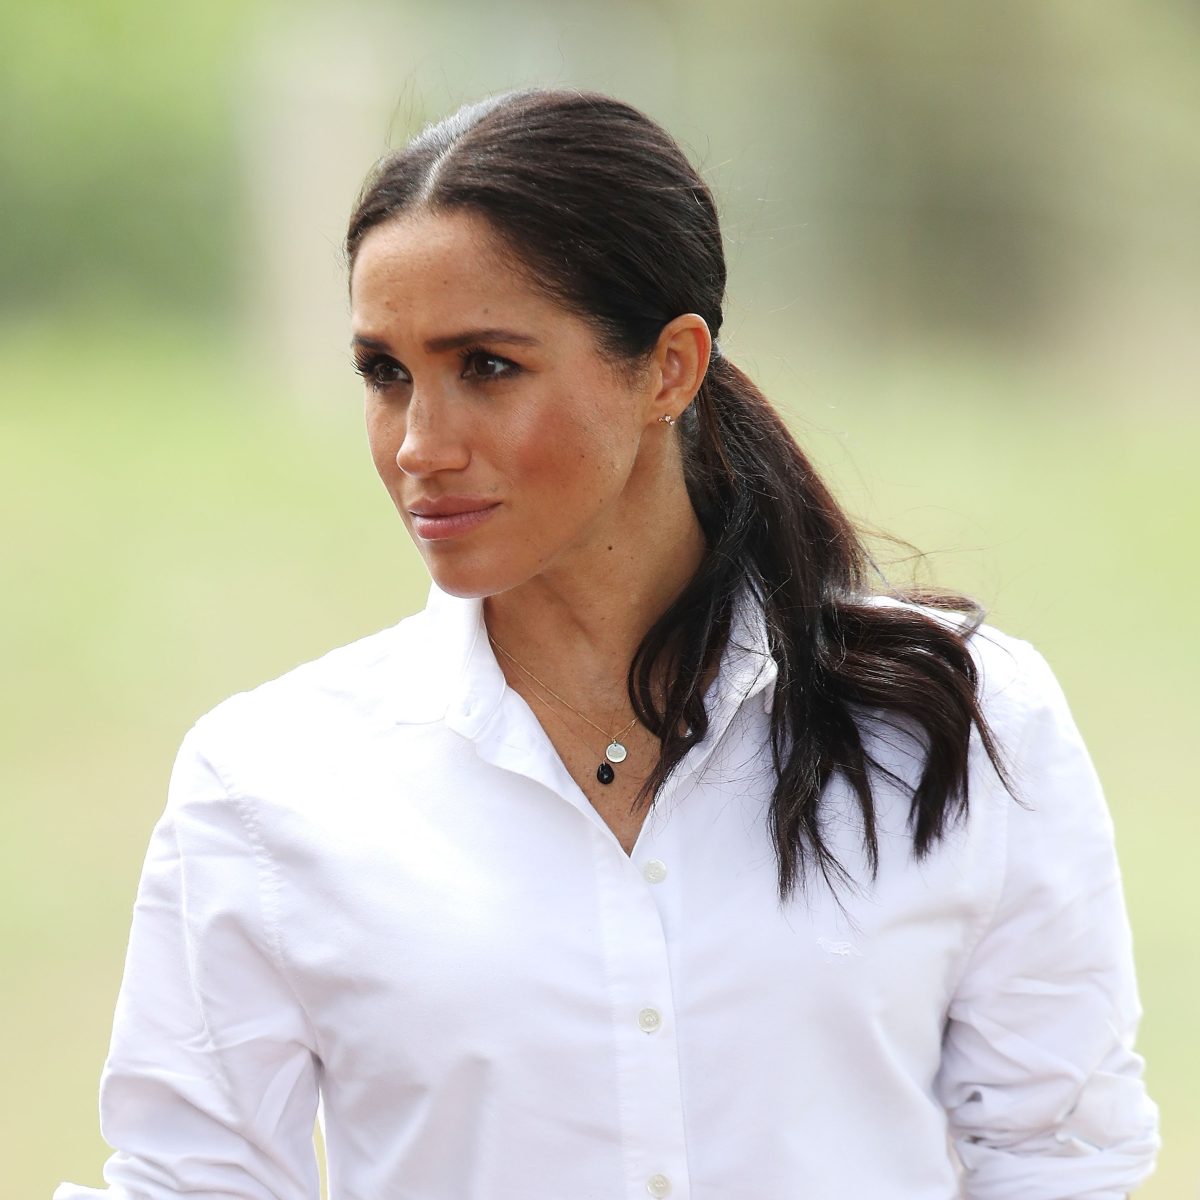 King Charles and Prince William Refused to Have Video Call With Meghan ...